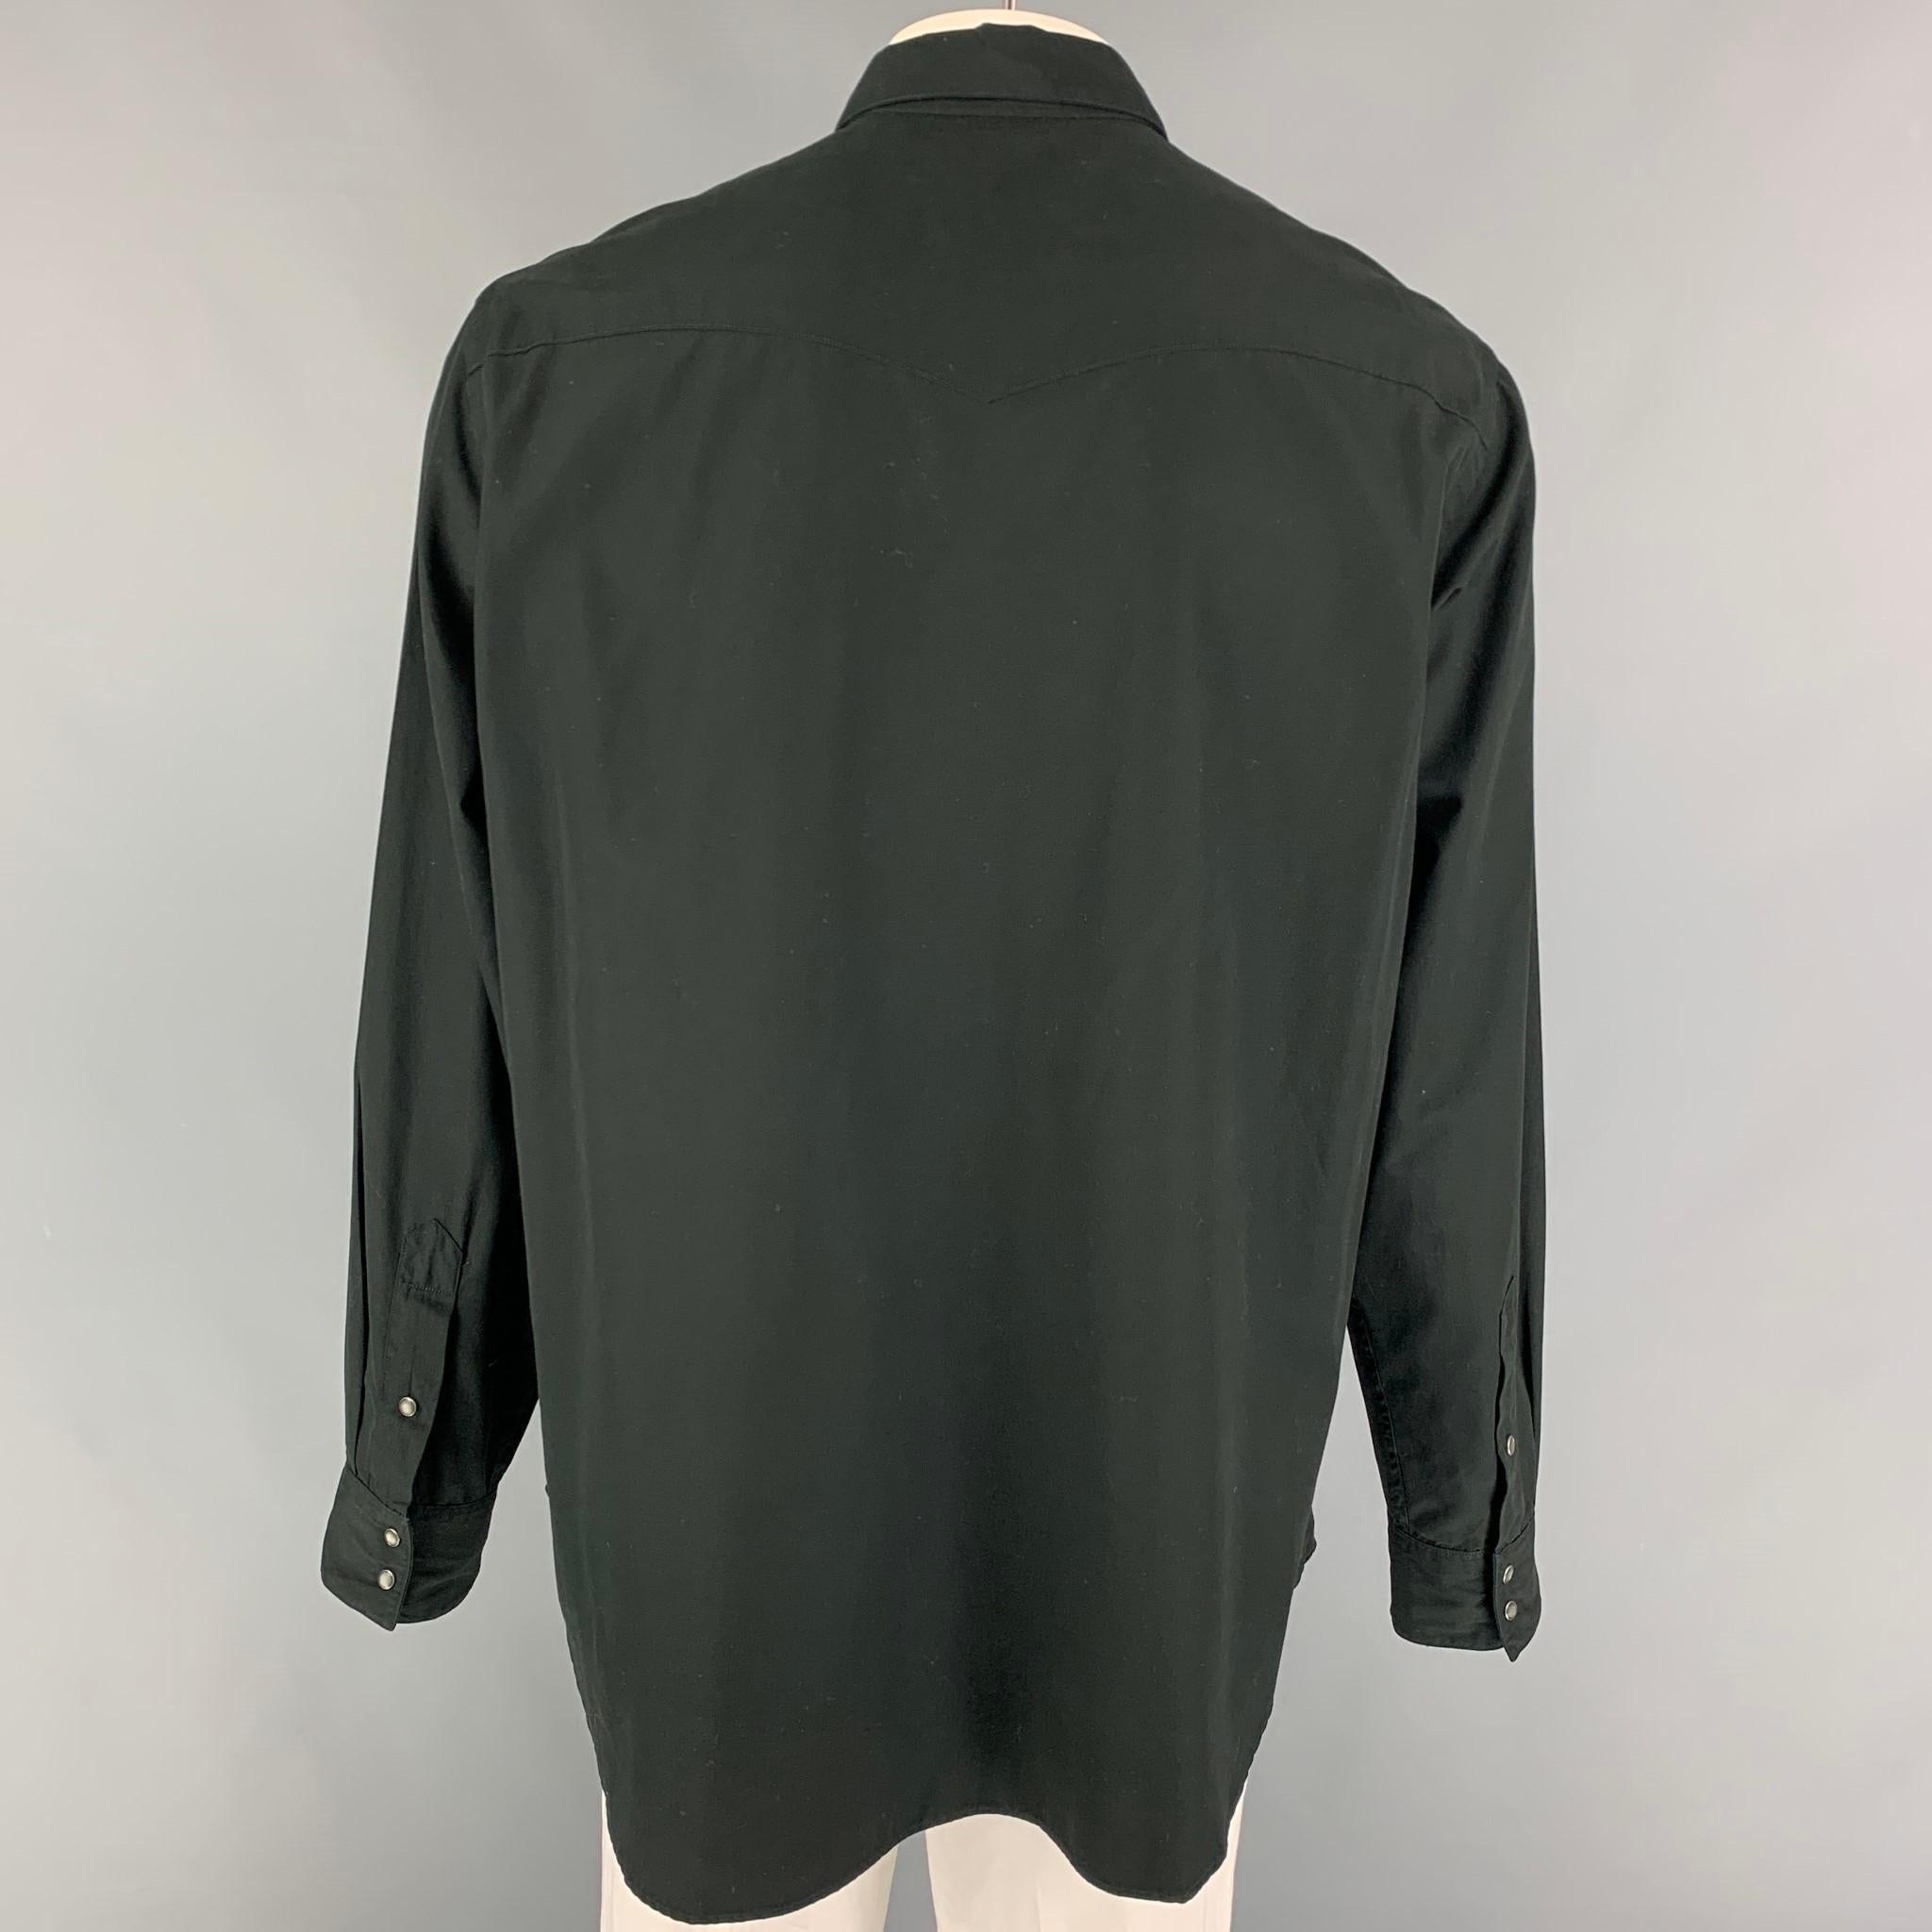 POLO by RALPH LAUREN long sleeve shirt comes in a black cotton featuring a classic western style, flap pockets, pointed collar, and a snap button closure. 

Very Good Pre-Owned Condition.
Marked: XL

Measurements:

Shoulder: 19 in.
Chest: 46